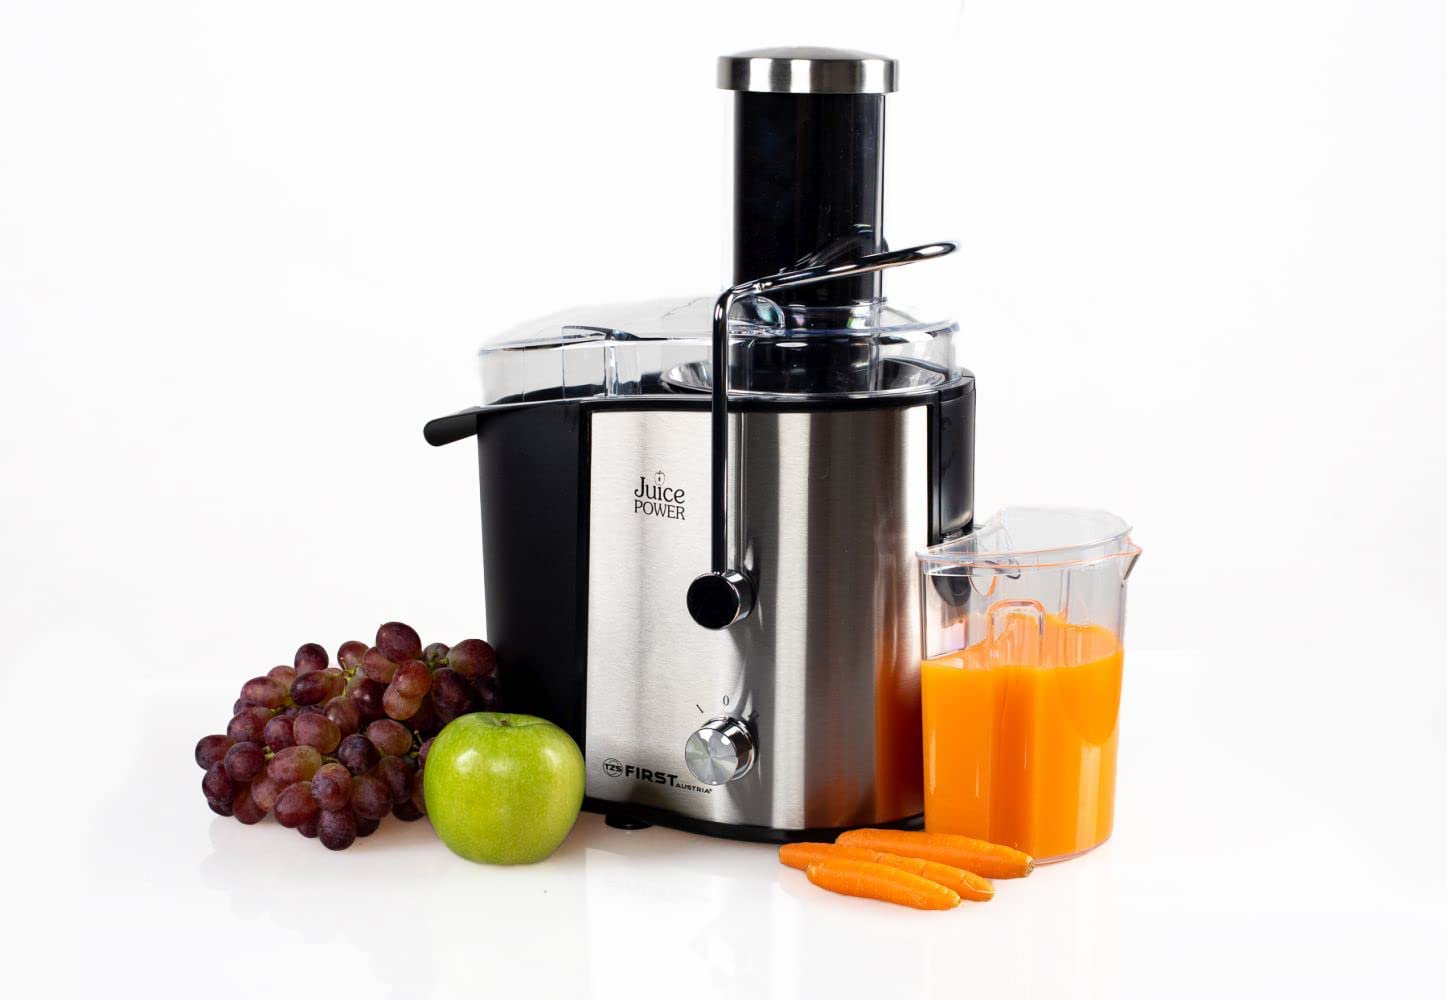 TZS First Austria - 800 Watt Stainless Steel Centrifugal Juicer XXL 75 mm Filling Opening, Suction Cup Feet, Drip Stop Function Centrifugal Juicer Electric Juicer Extractor, Overheating Protection BPA Free